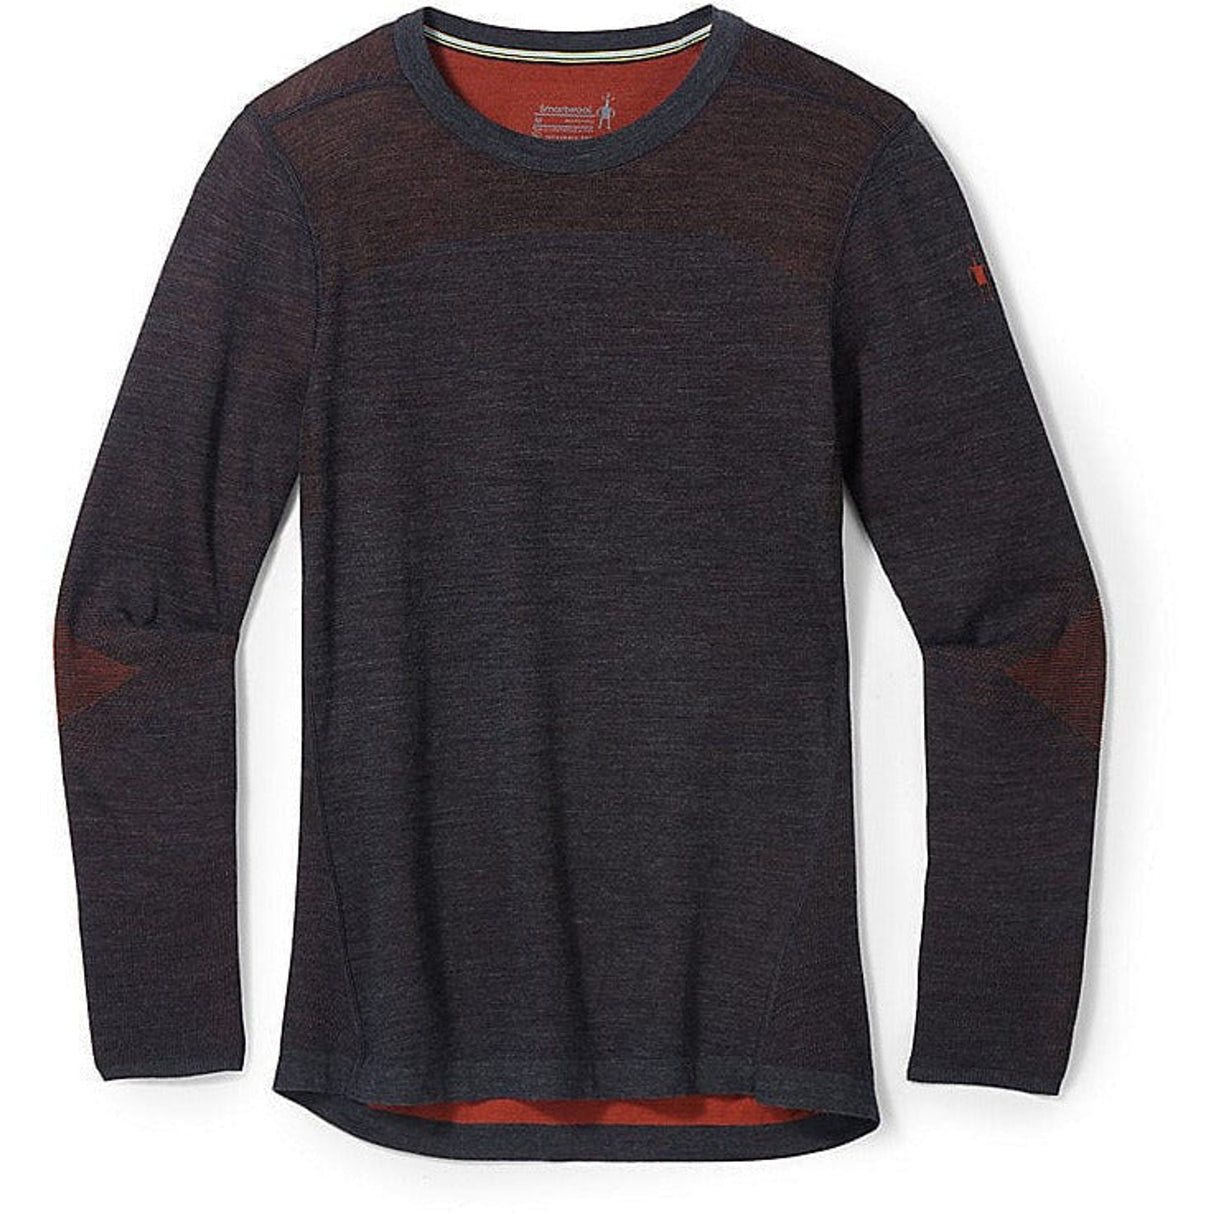 Smartwool Mens Intraknit Thermal Merino Base Layer Crew  -  Small / Charcoal Heather